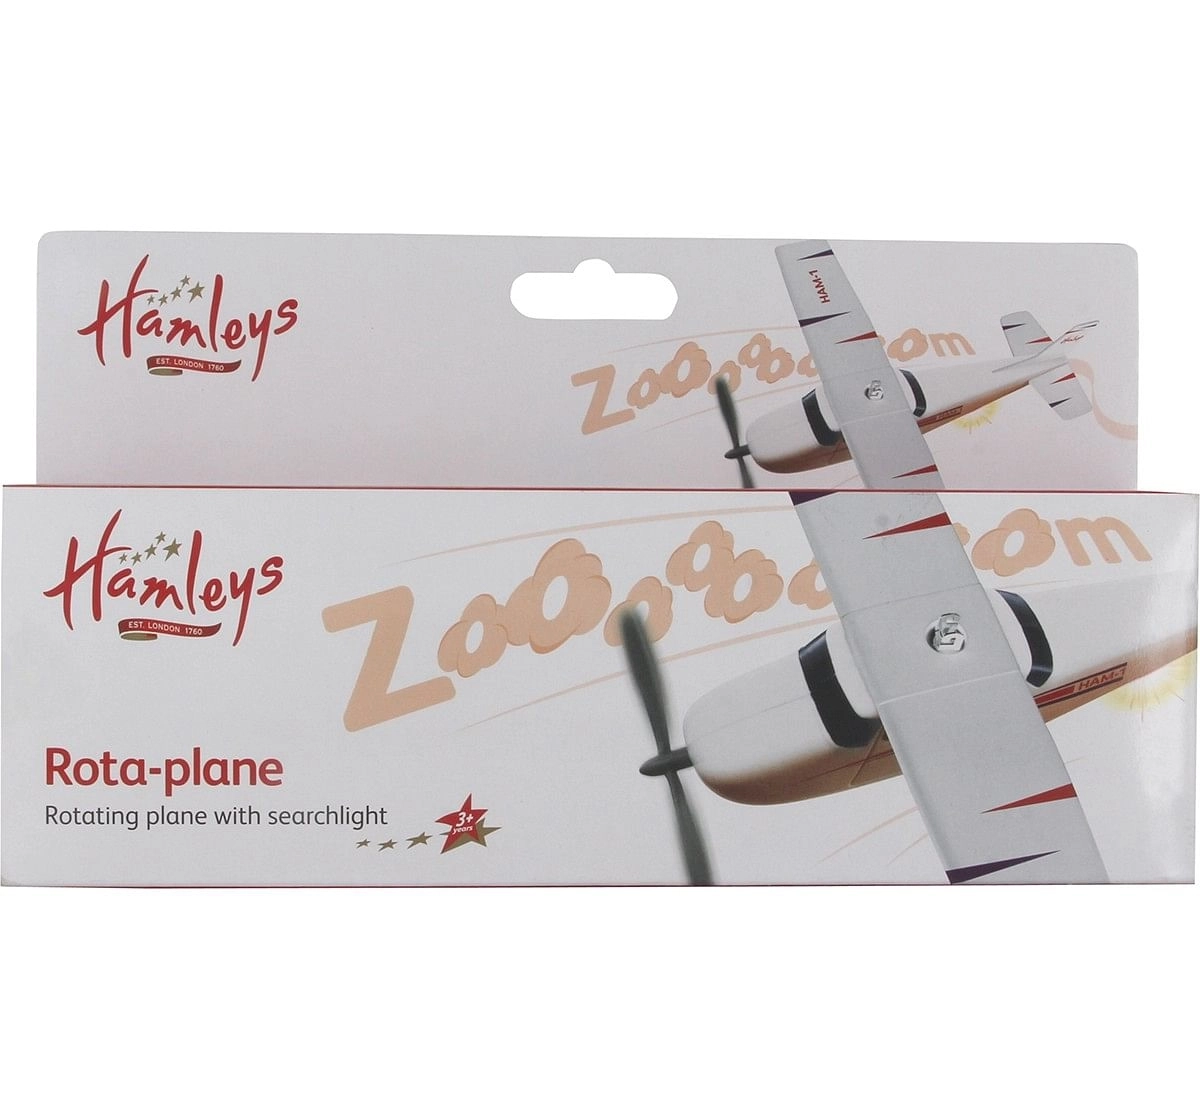 Hamleys Rota-Plane Toy With Searchlight (Red/Black) Impulse Toys for Kids age 3Y+ 